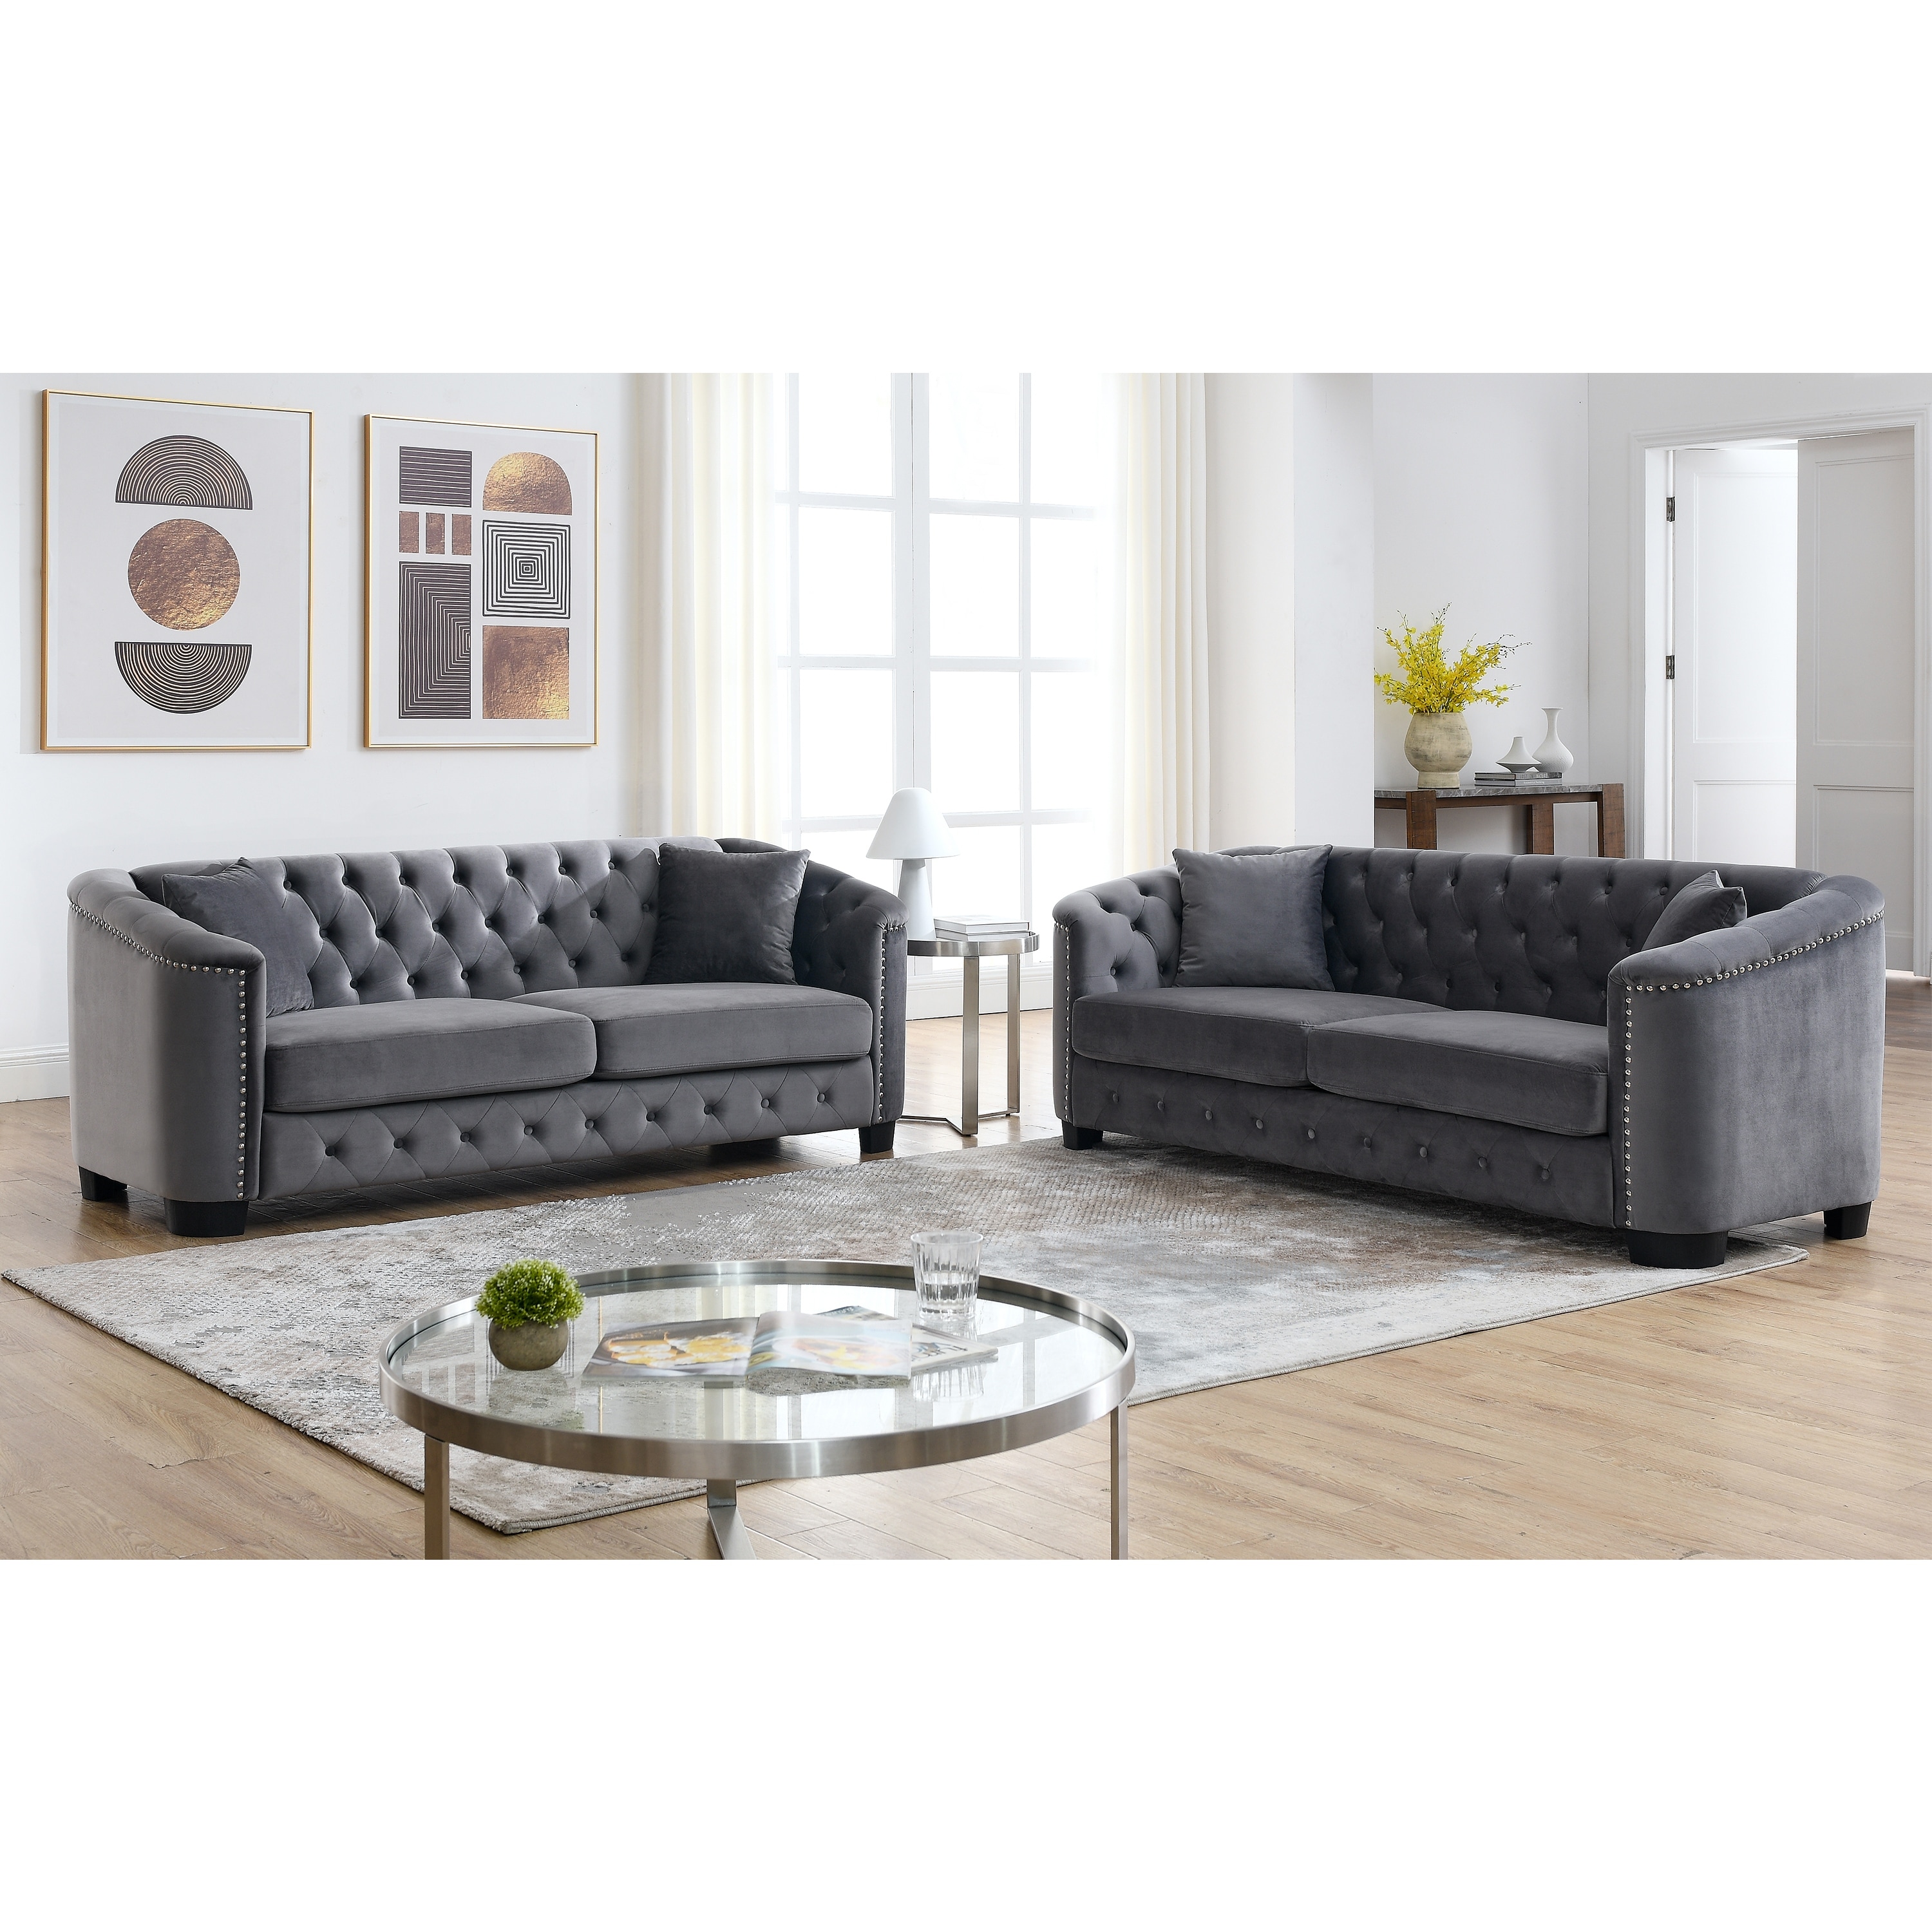 https://ak1.ostkcdn.com/images/products/is/images/direct/6bbb2b25b35e9dd57de779e225e653f9c2093606/2-Piece-Velvet-Upholstered-Sofa%2C-3-and-3-Seater-Square-Arm-Couch-with-Button-and-Pillow-for-Living-Room.jpg